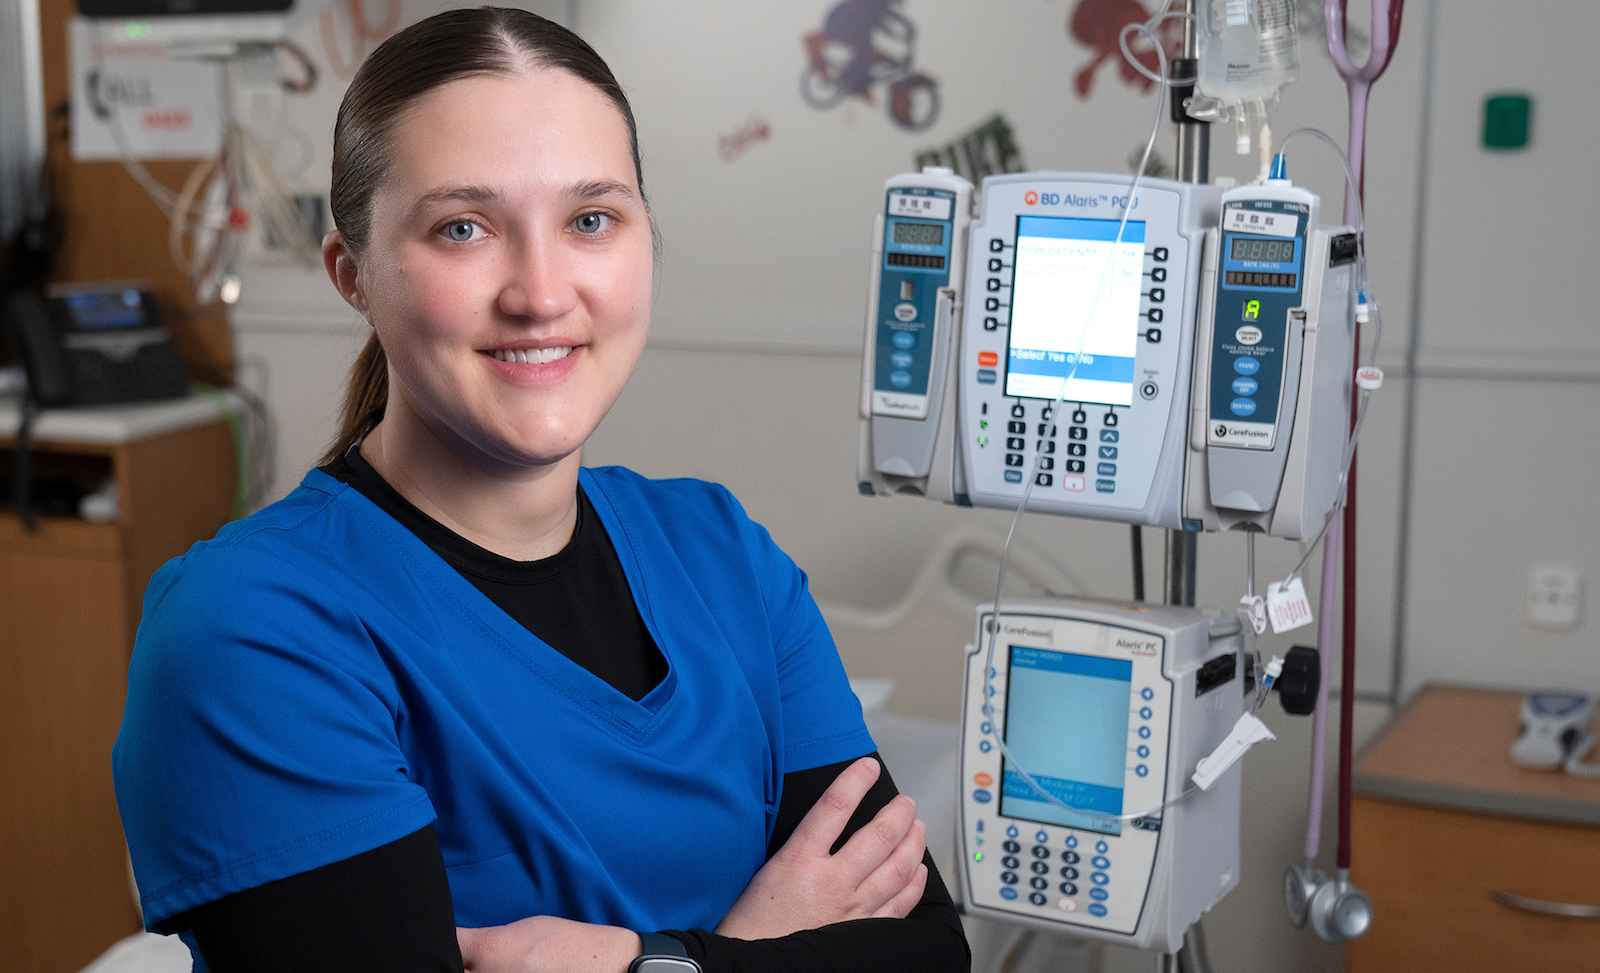 Skylar Lund at St. Jude’s Children Research Hospital in front of a medical device.  